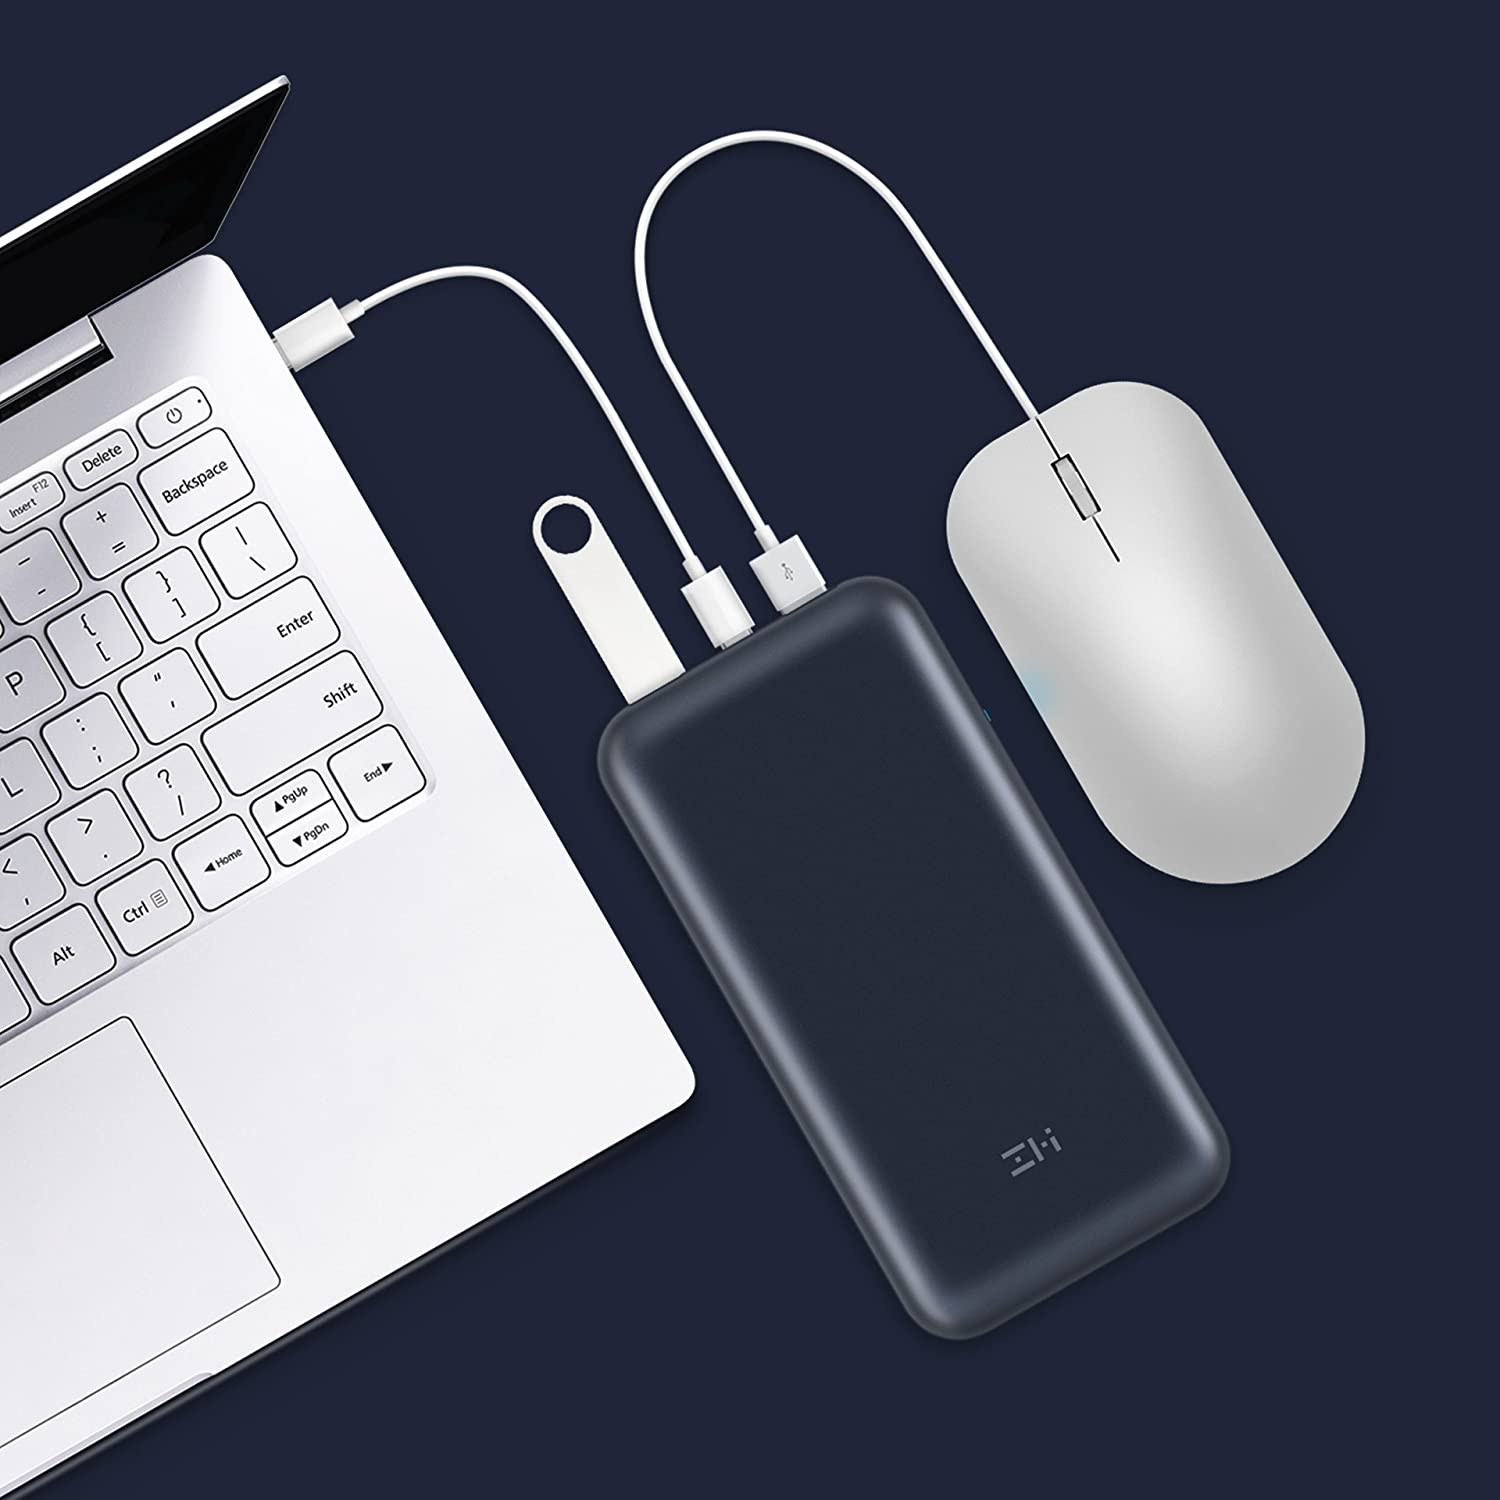 Top 10 Powerbanks You Can Use to Charge Your Laptop Dignited